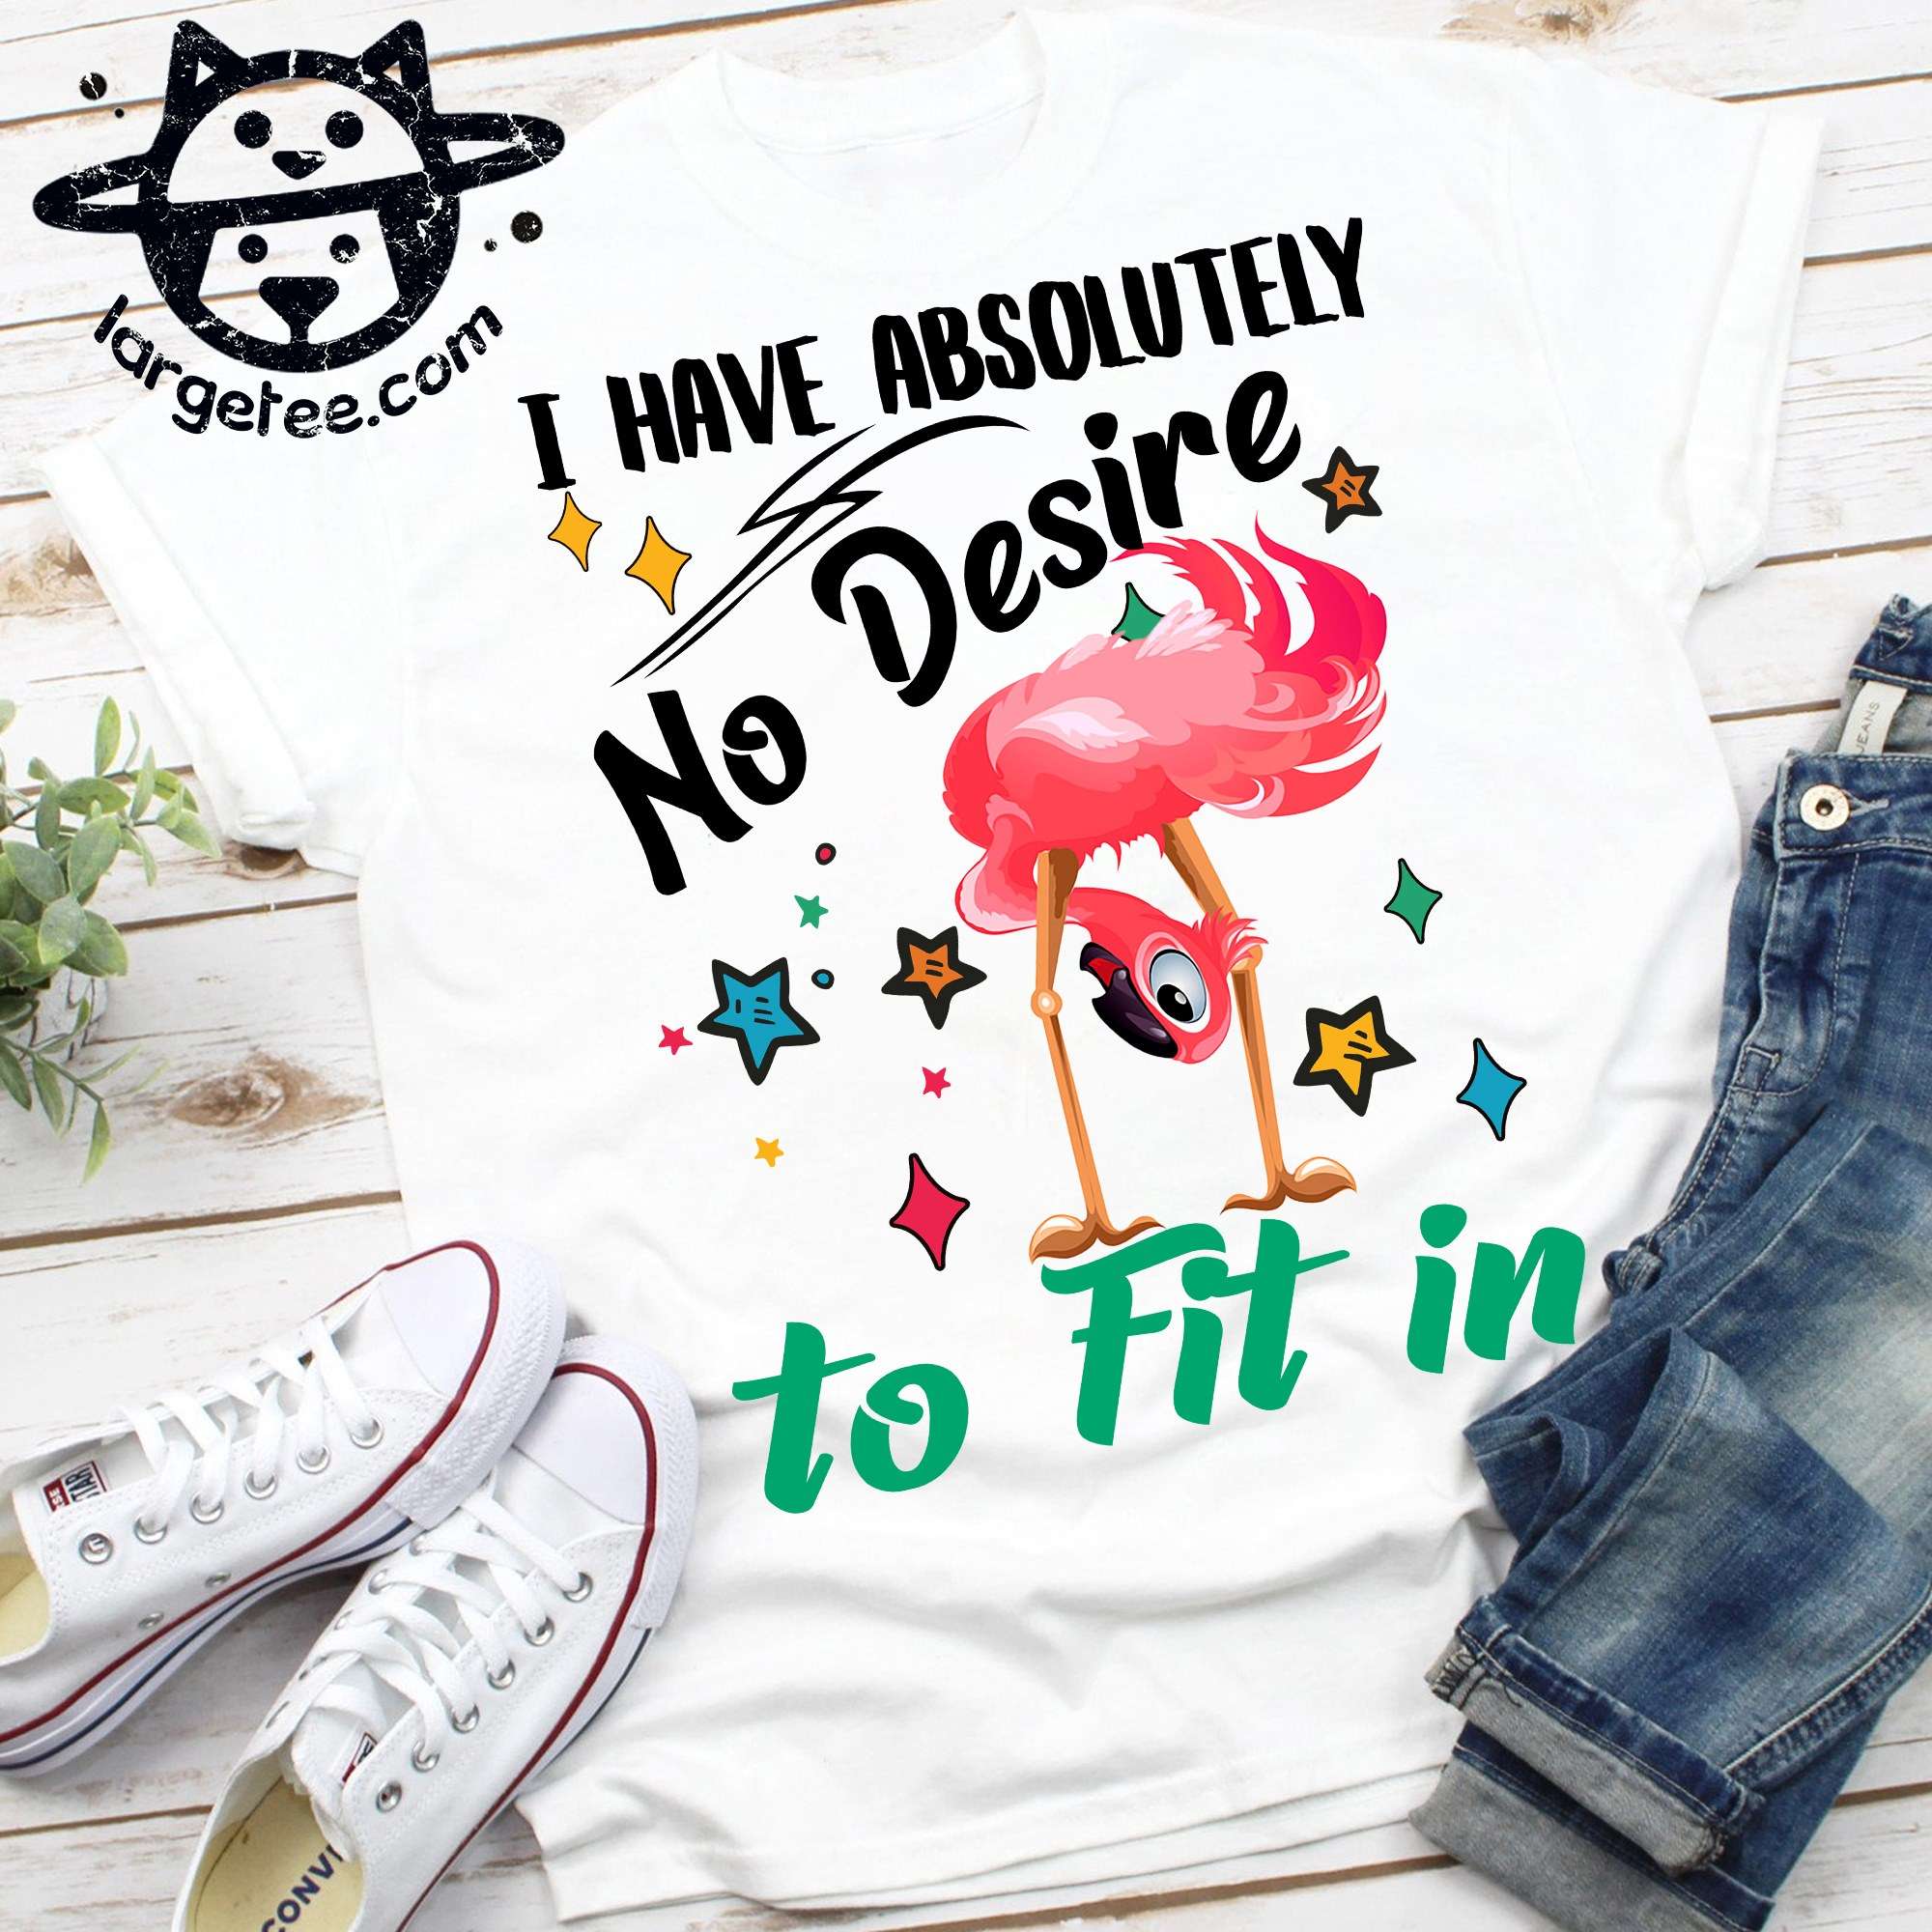 I have absolutely no desire to fit in - Grumpy flamingo